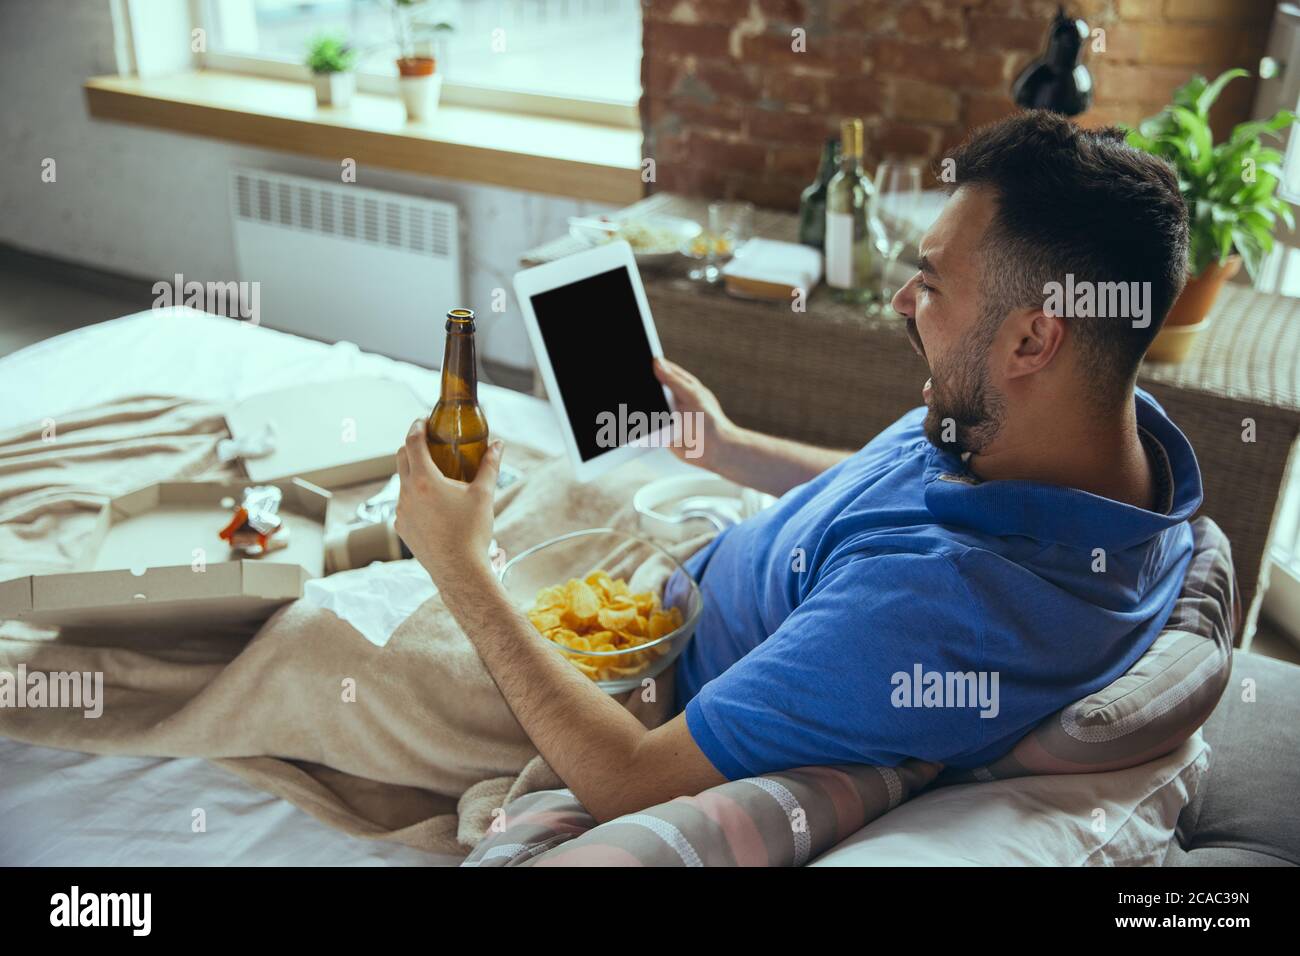 Cheering, screaming. Lazy caucasian man living in his bed surrounded with messy. No need to go out to be happy. Using gadgets, watching movie and series, social media, looks emotional. Home lifestyle. Stock Photo